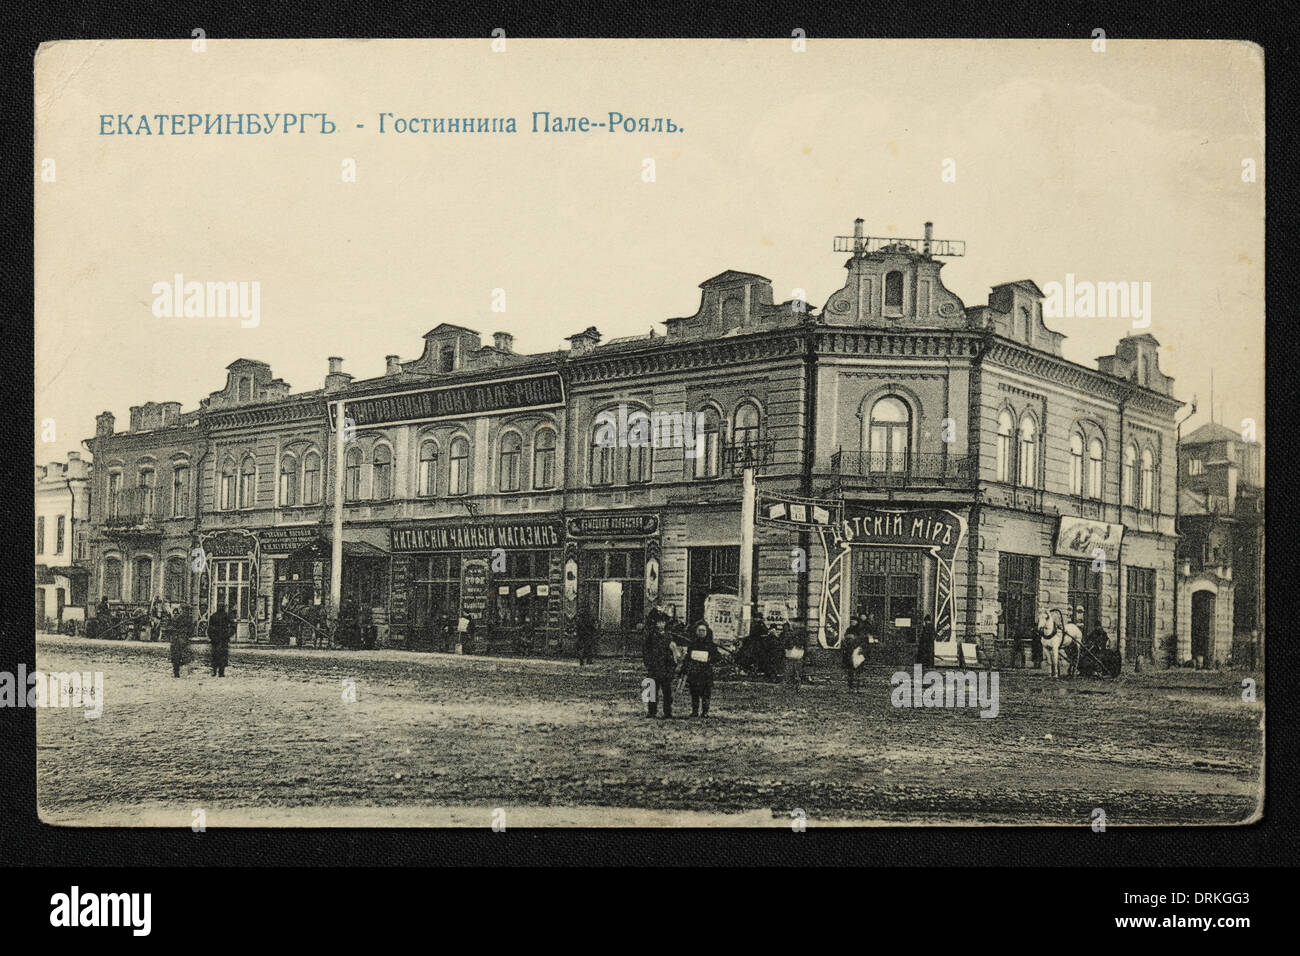 Palais Royal Hotel in Yekaterinburg, Russian Empire. Black and white vintage photograph by Russian photographer Nikolai Vvedensky dated from the beginning of the 20th century issued in the Russian vintage postcard published by M.S. Semkov, Yekaterinburg. Text in Russian: Yekaterinburg. Palais Royal Hotel. Courtesy of the Azoor Postcard Collection. Stock Photo